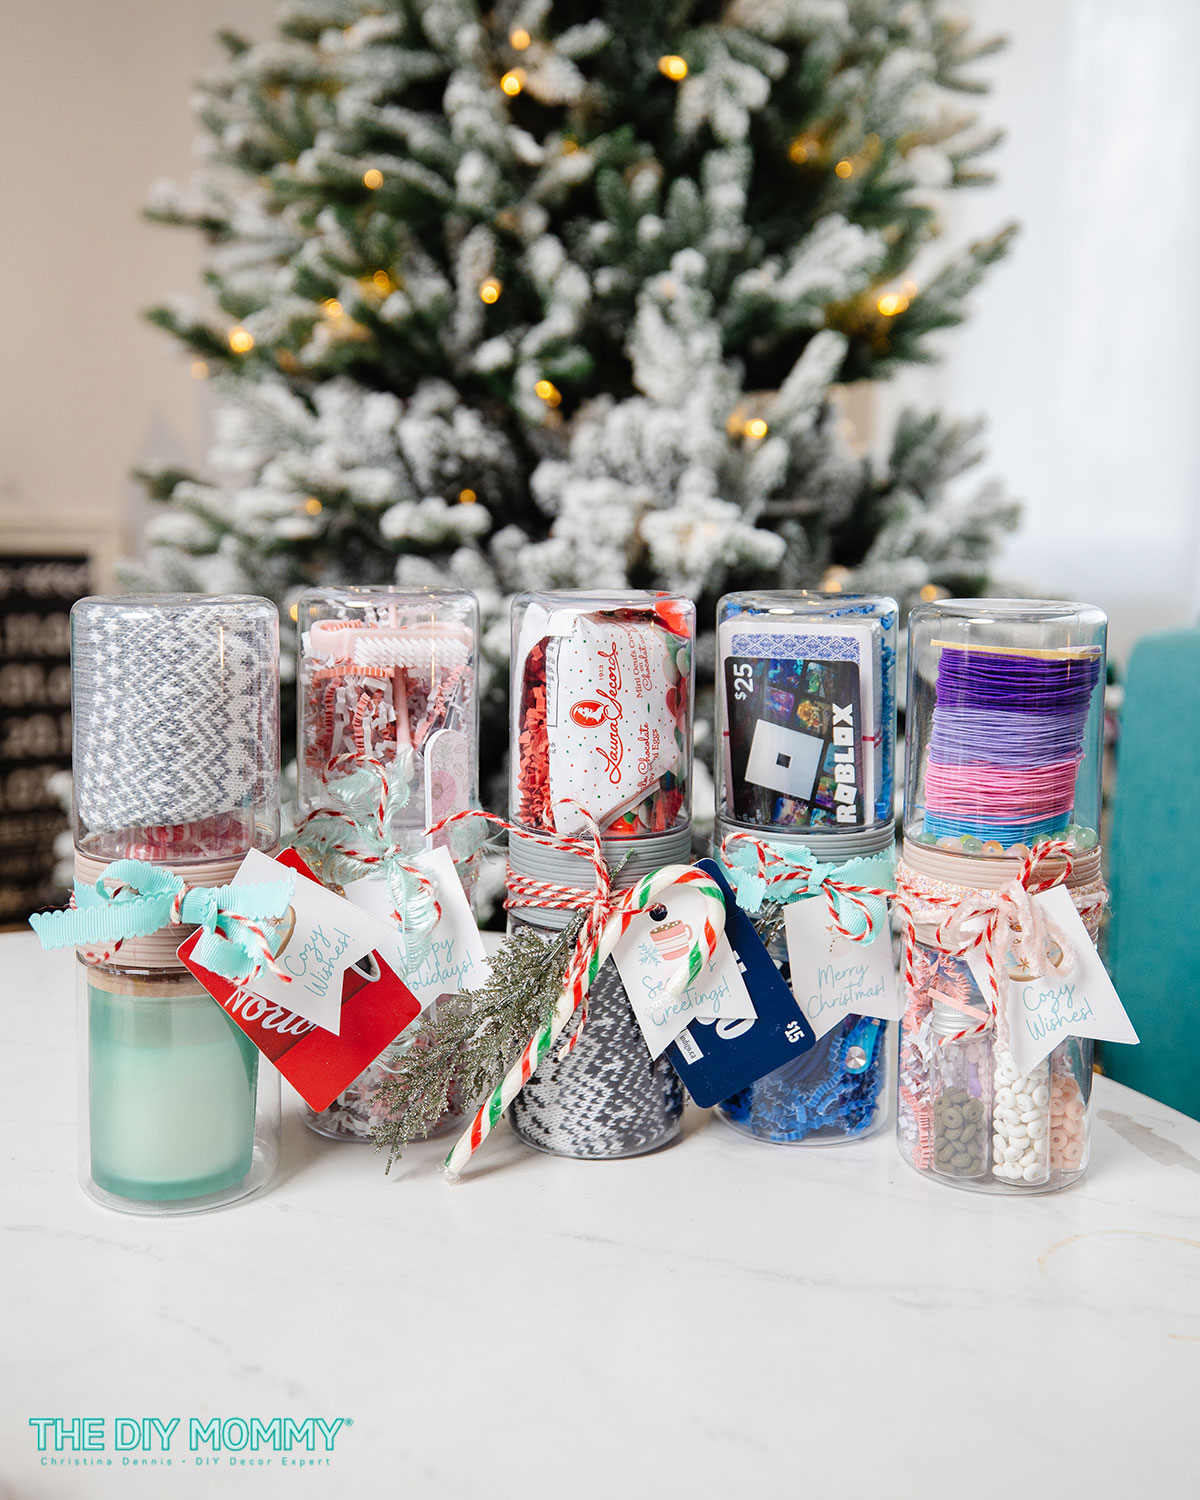 How to save money Christmas shopping: Stocking stuffer ideas from the dollar  store - Fab Everyday